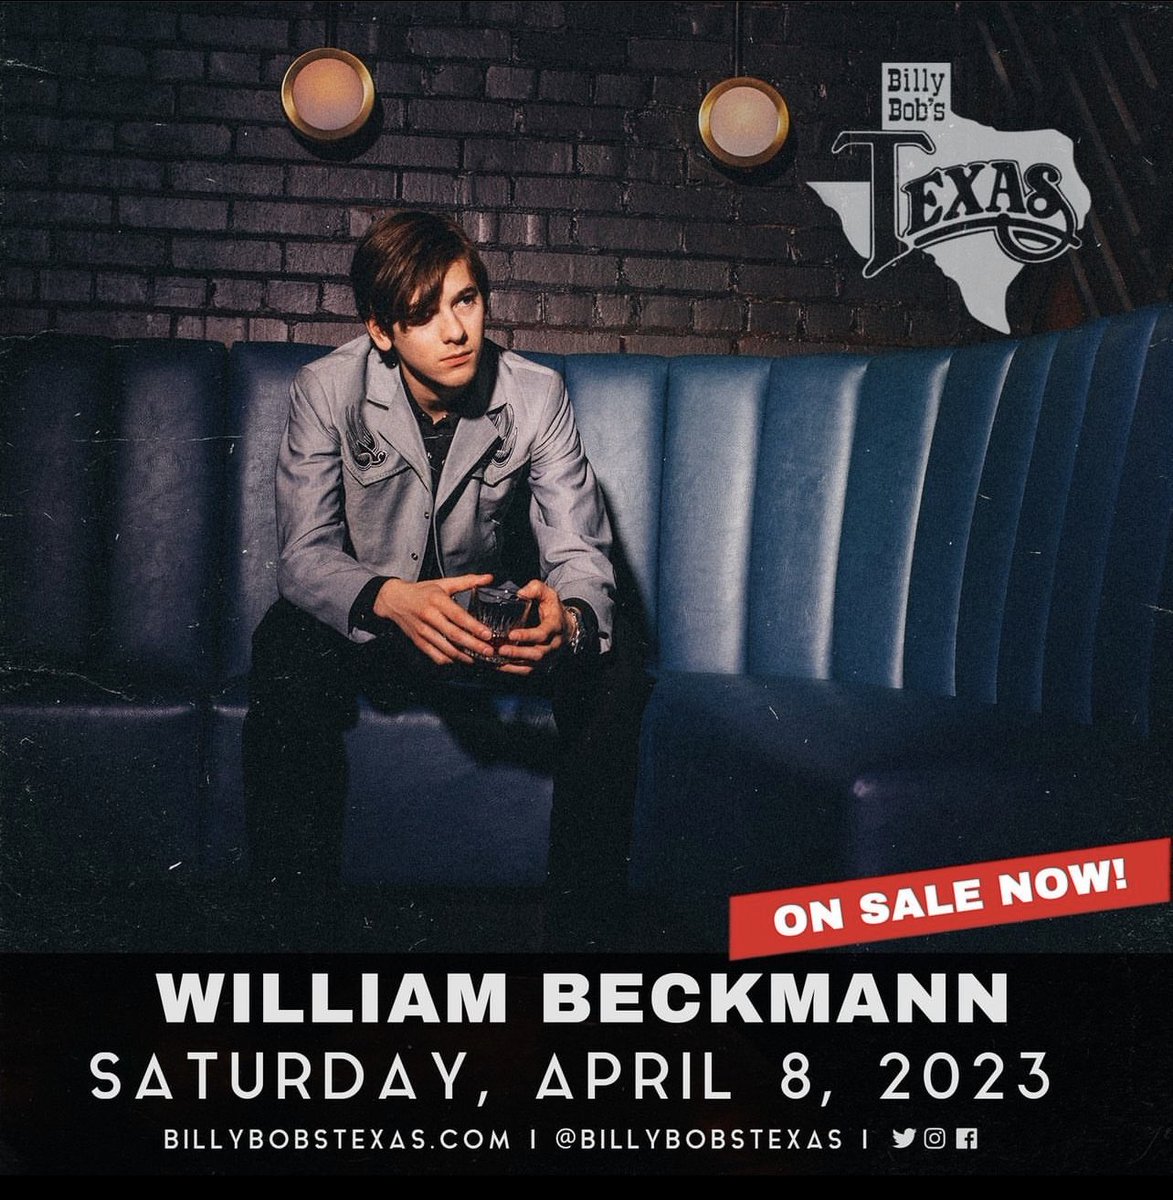 We are making our @BillyBobsTexas debut this Saturday! @TheWillBeckmann